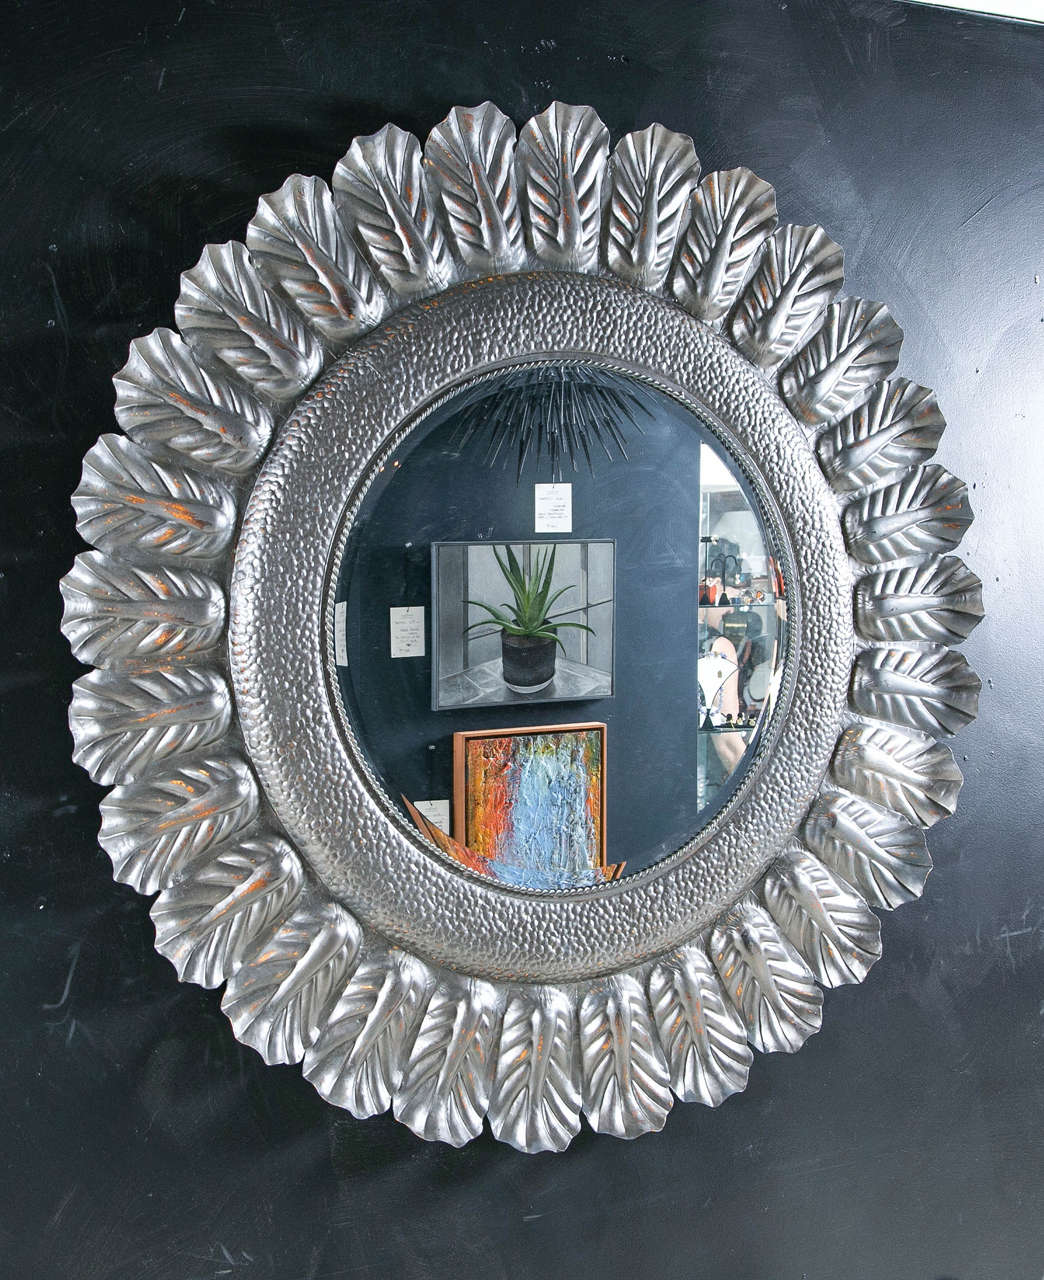 Mirror surrounded with painted ziaac leaves.